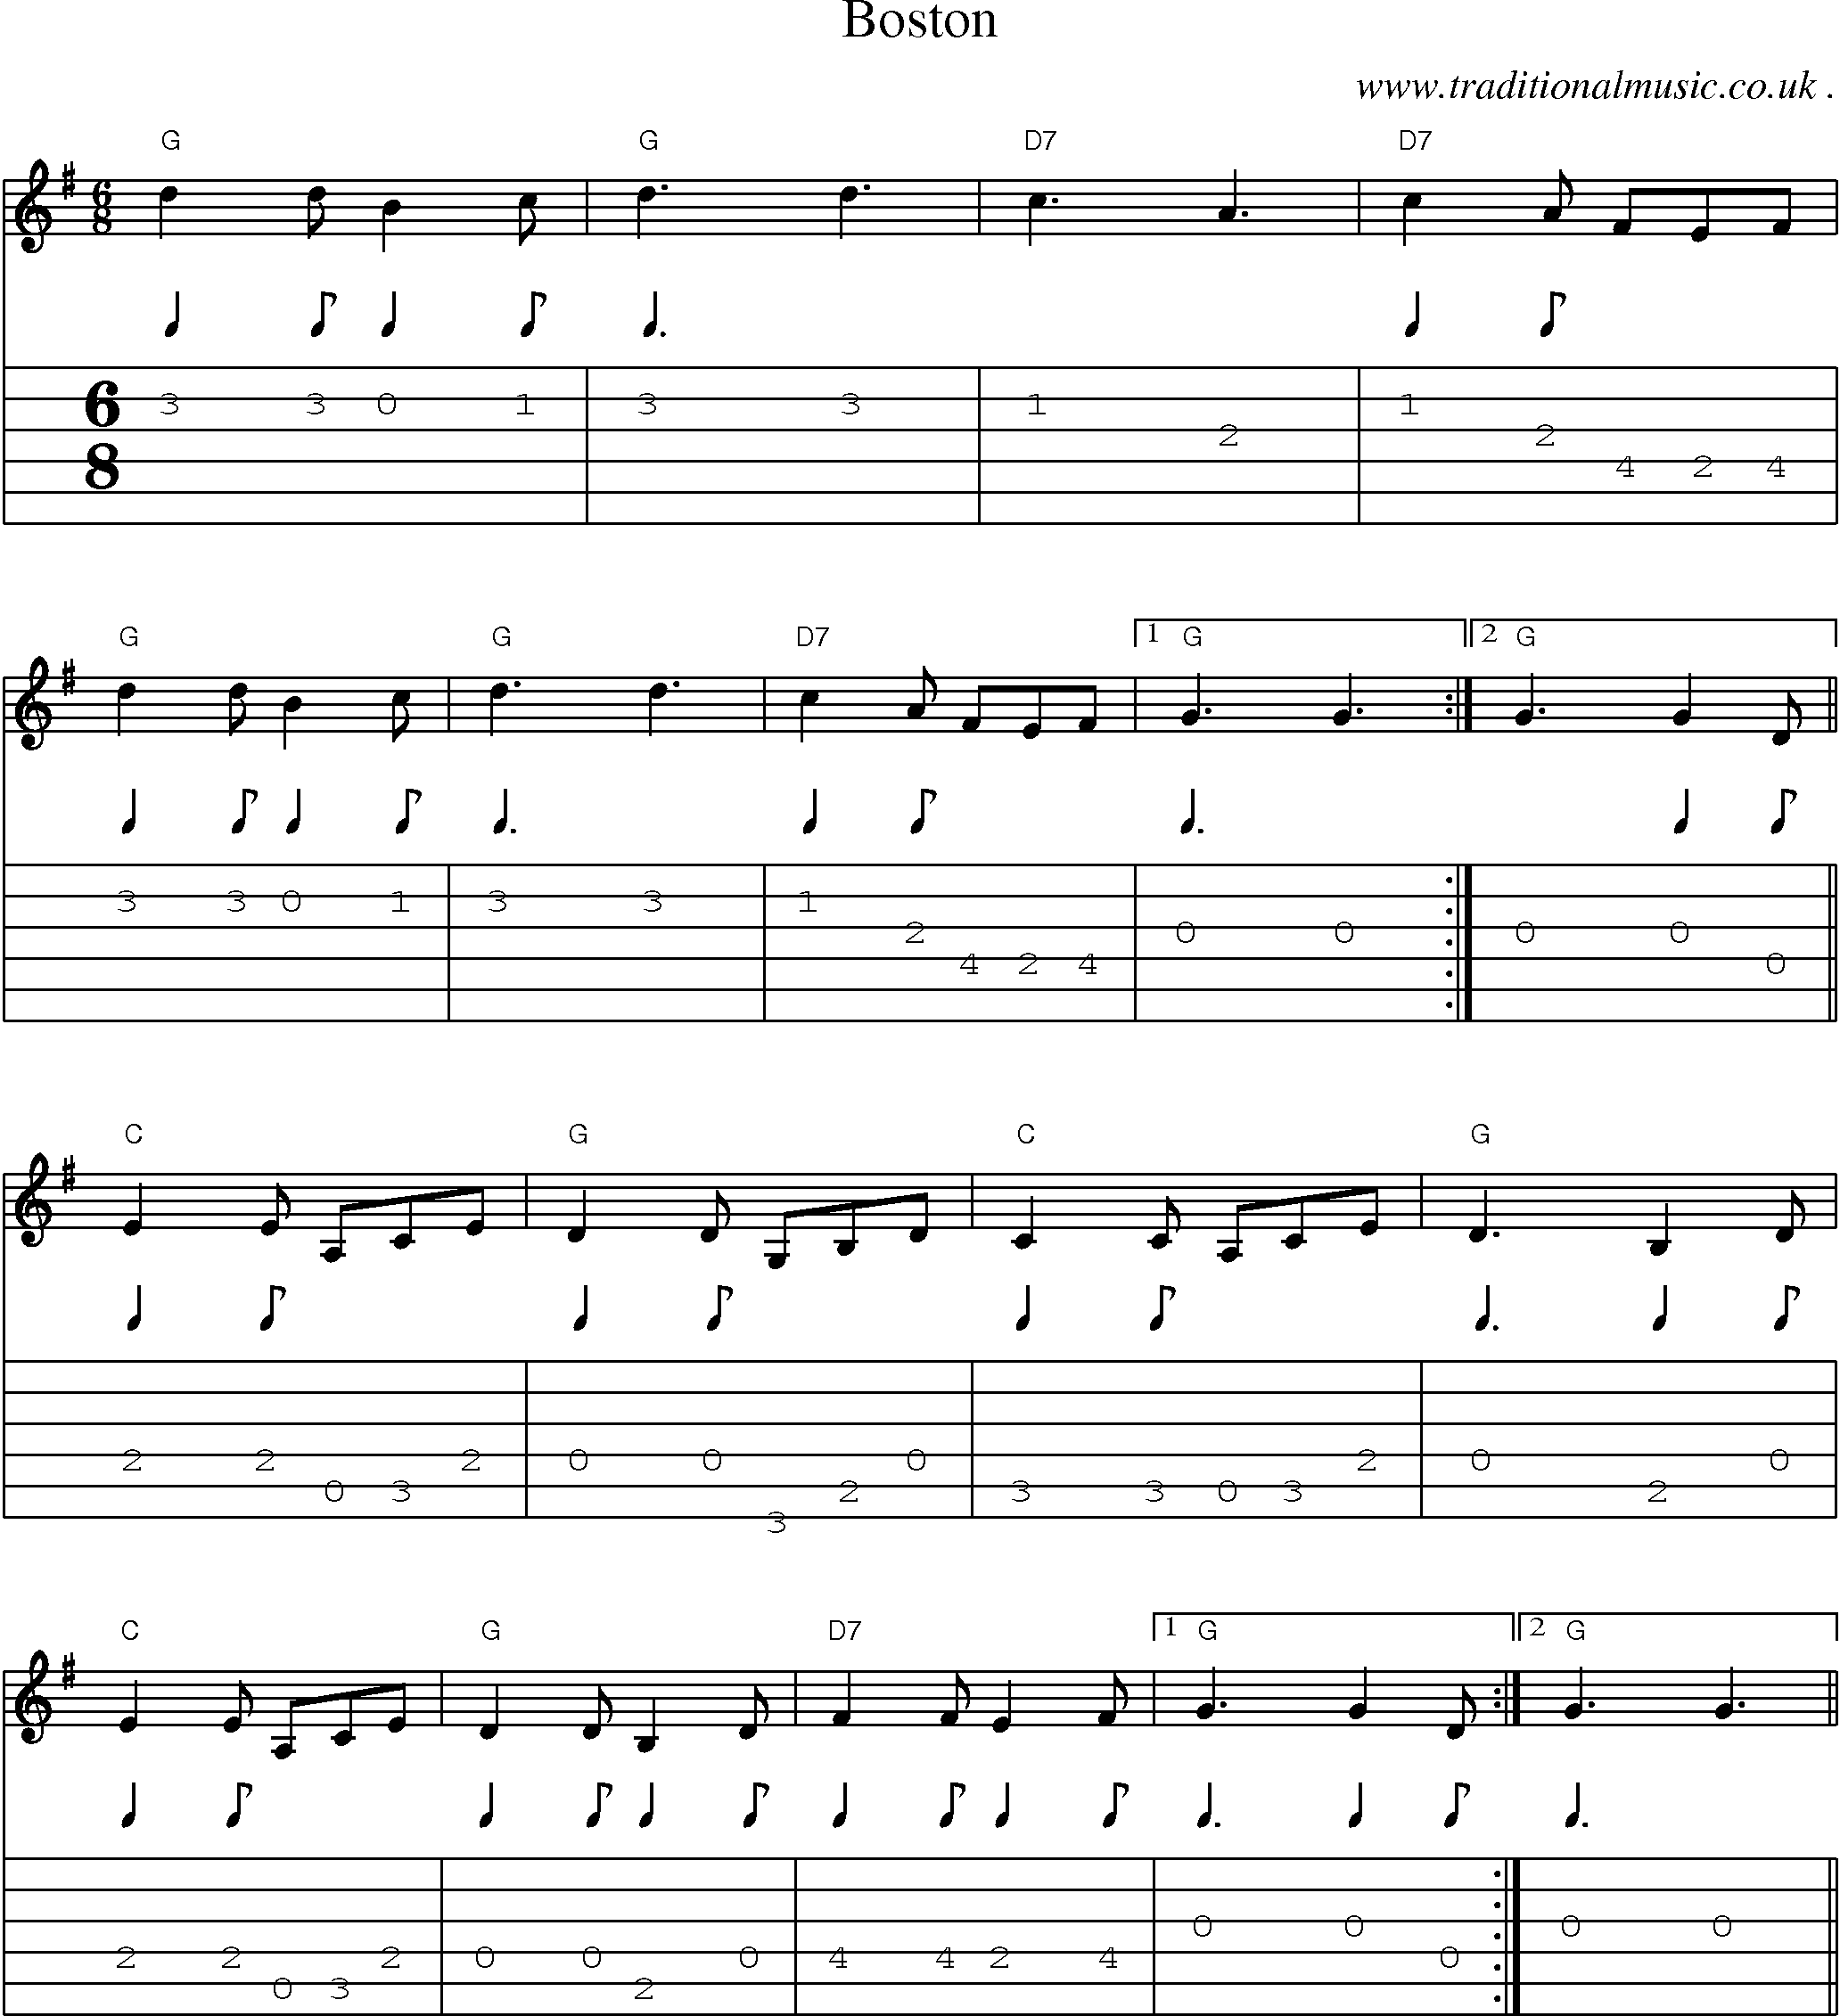 Music Score and Guitar Tabs for Boston